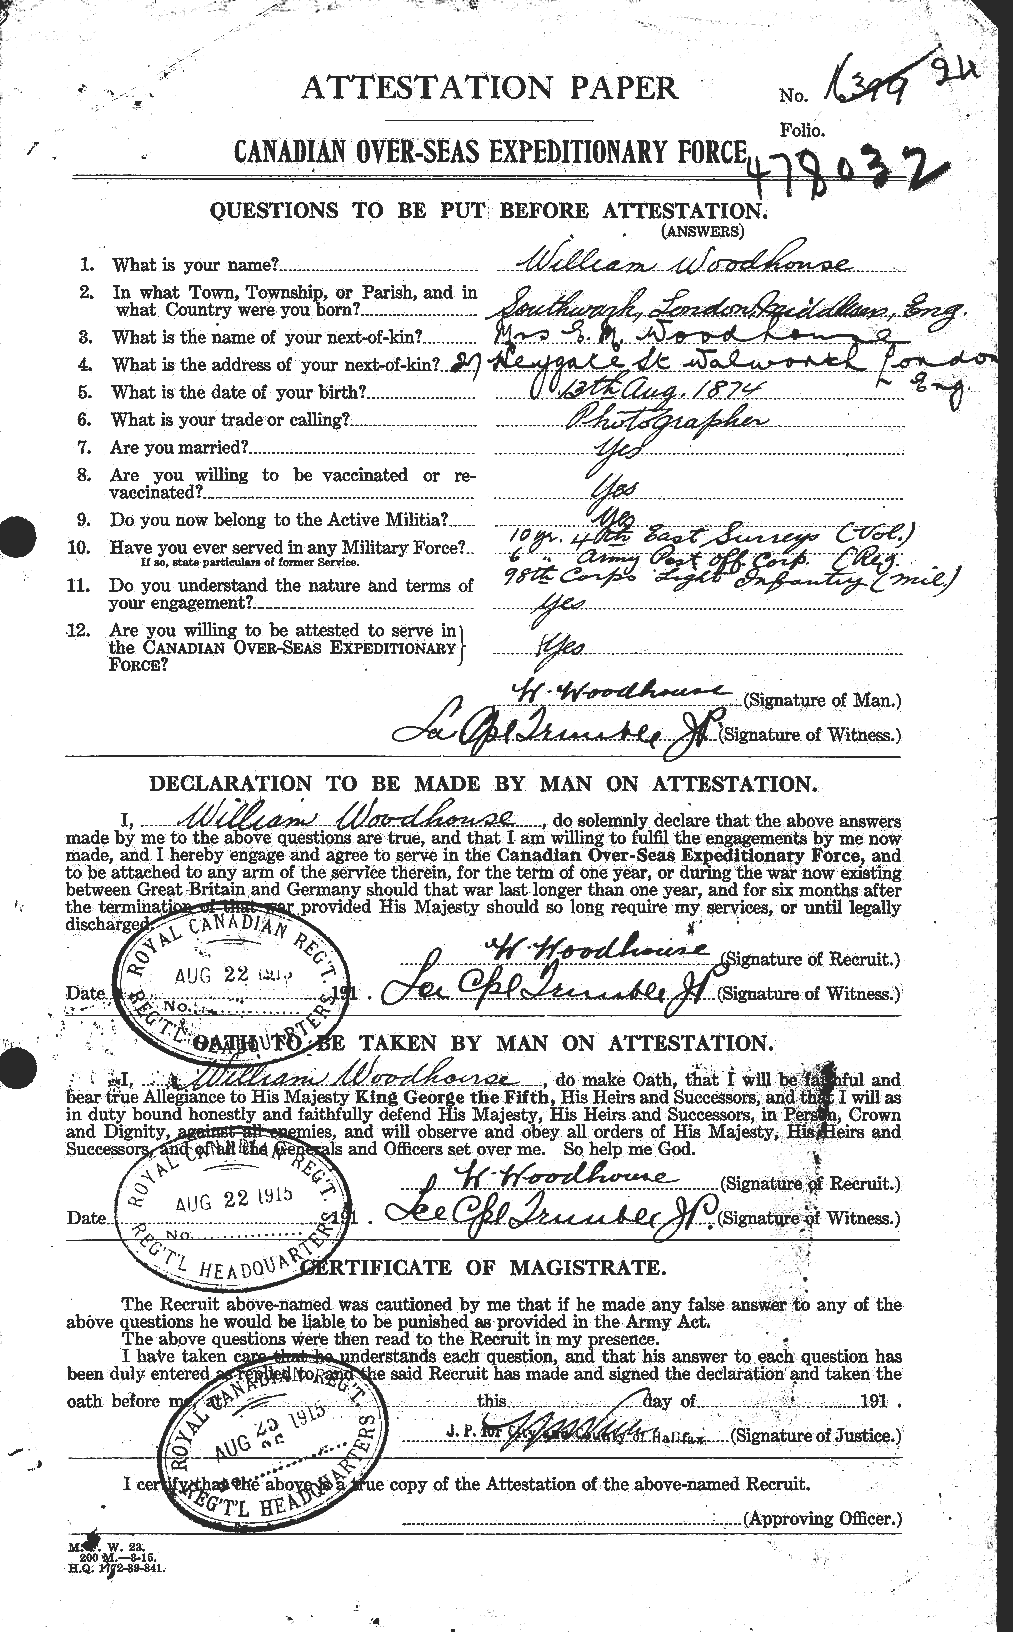 Attestation record: William Woodhouse